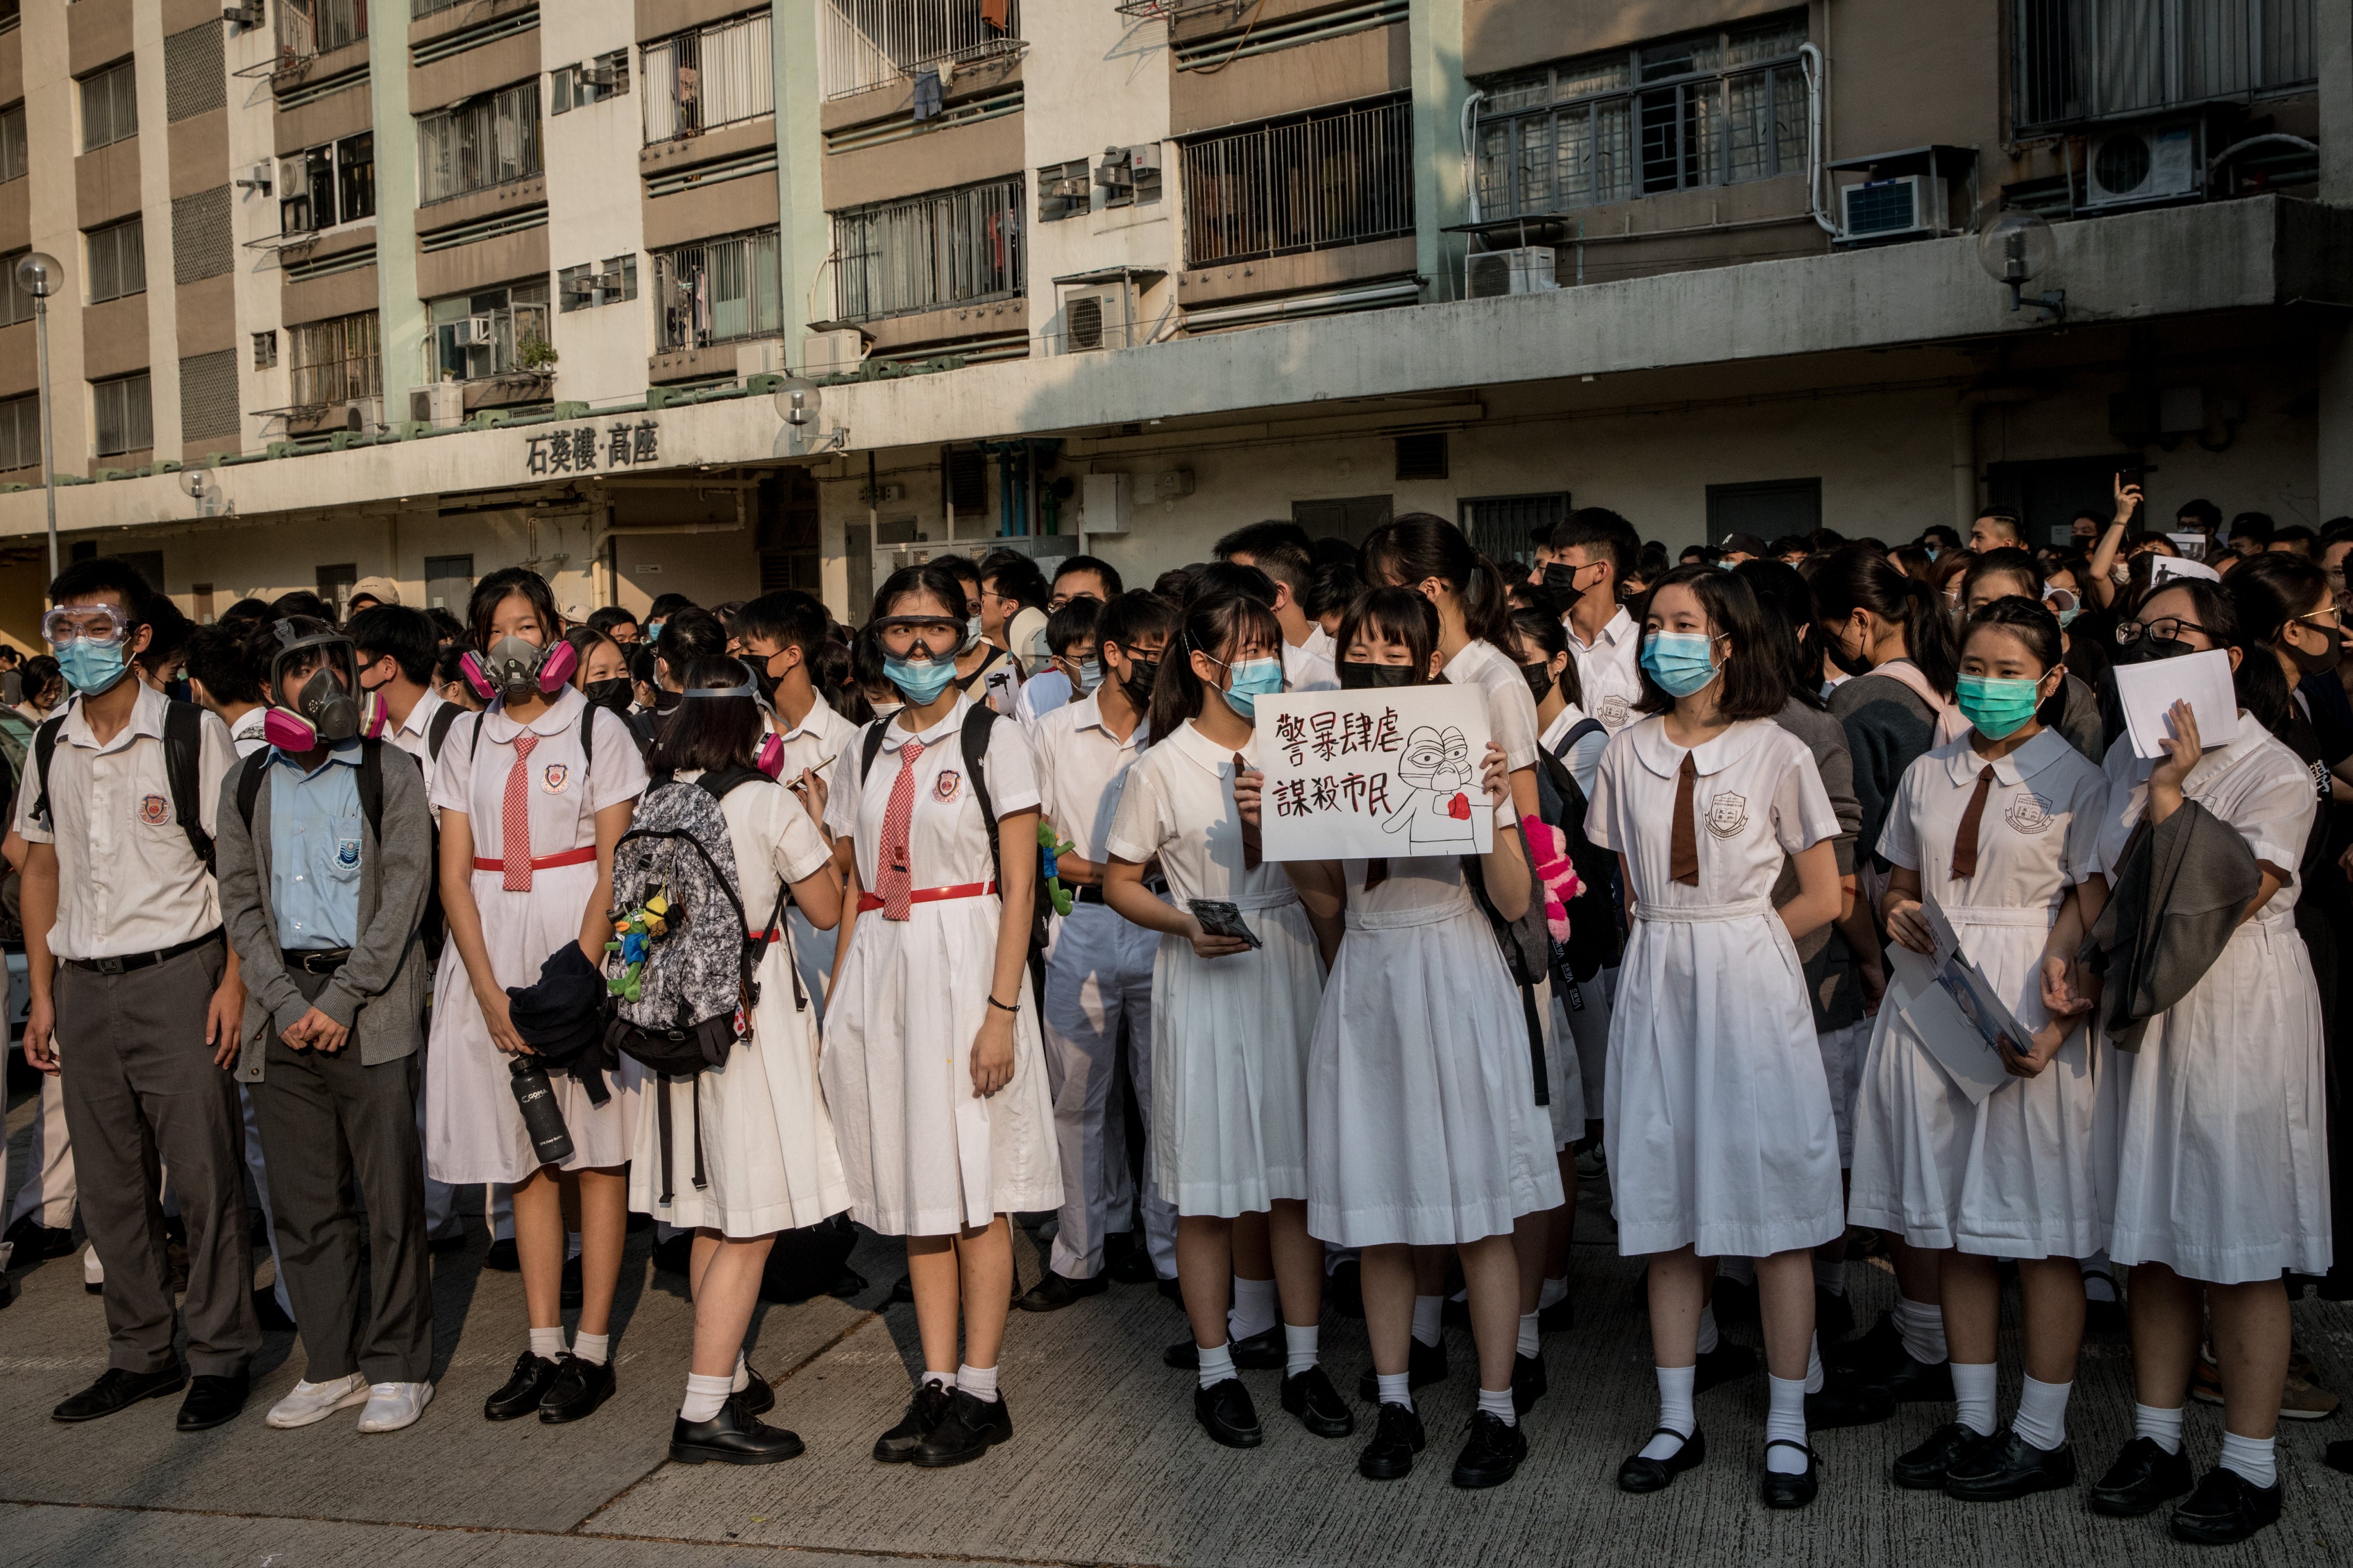 Schoolmates of a protester who was shot by a policeman during the October 1 protests, take part in a solidarity rally outside the Tsuen Wan Public Ho Chuen Yiu Memorial College on October 02, 2019 in Hong Kong, China. (Chris McGrath—Getty Images)